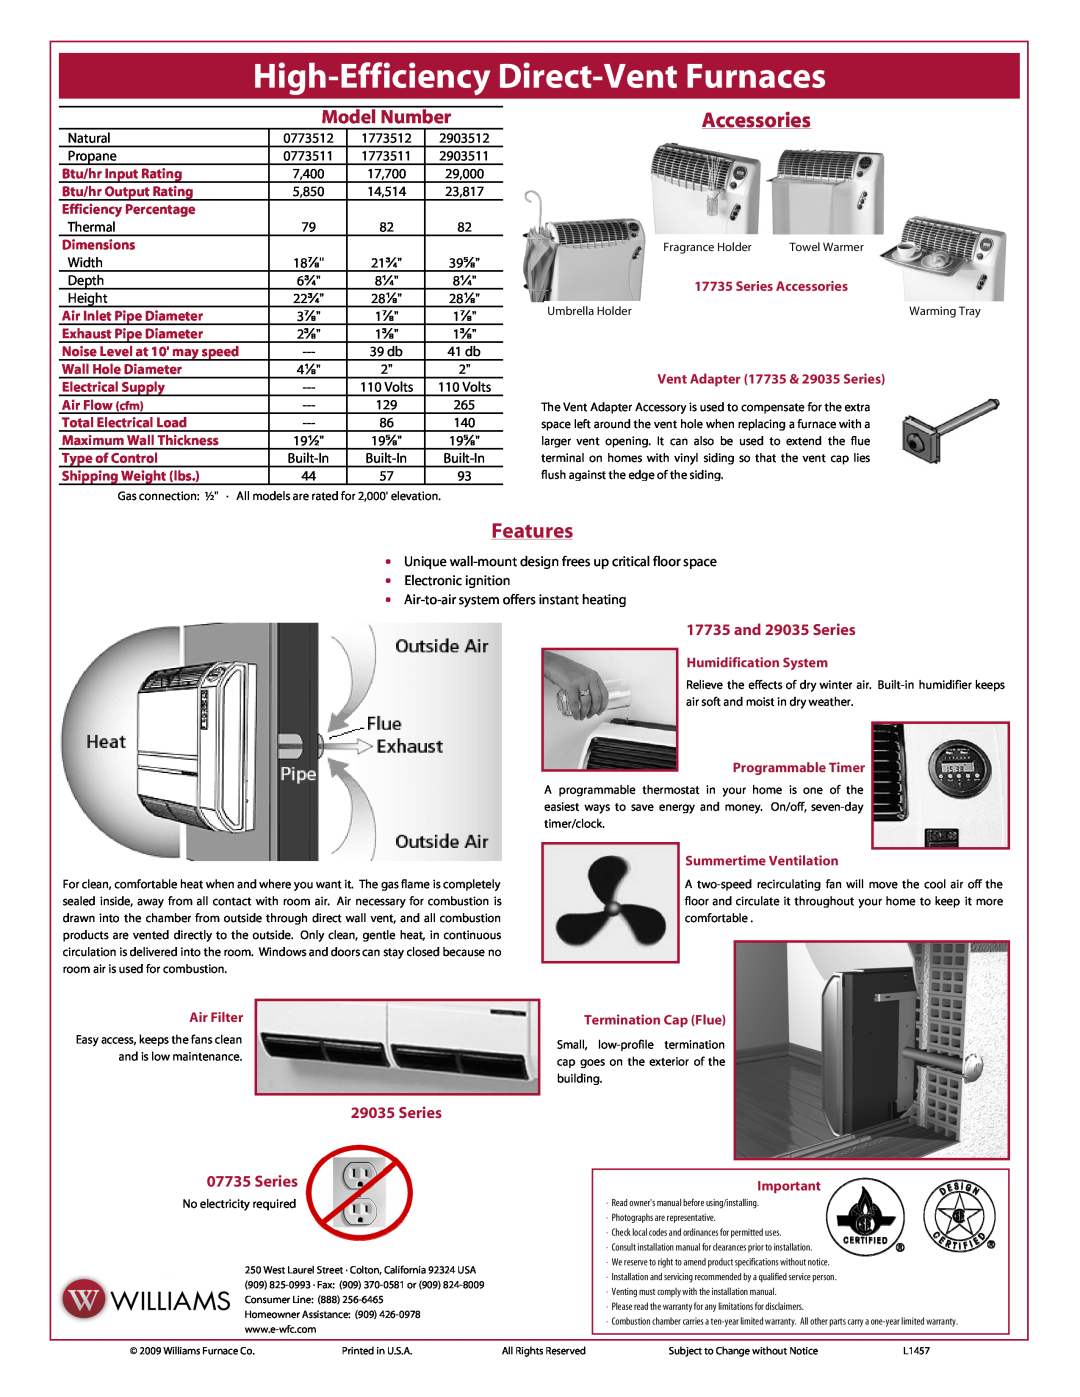 Williams 0773511, 07435, 17735 High-Efficiency Direct-VentFurnaces, Accessories, Features, Model Number, and 29035 Series 